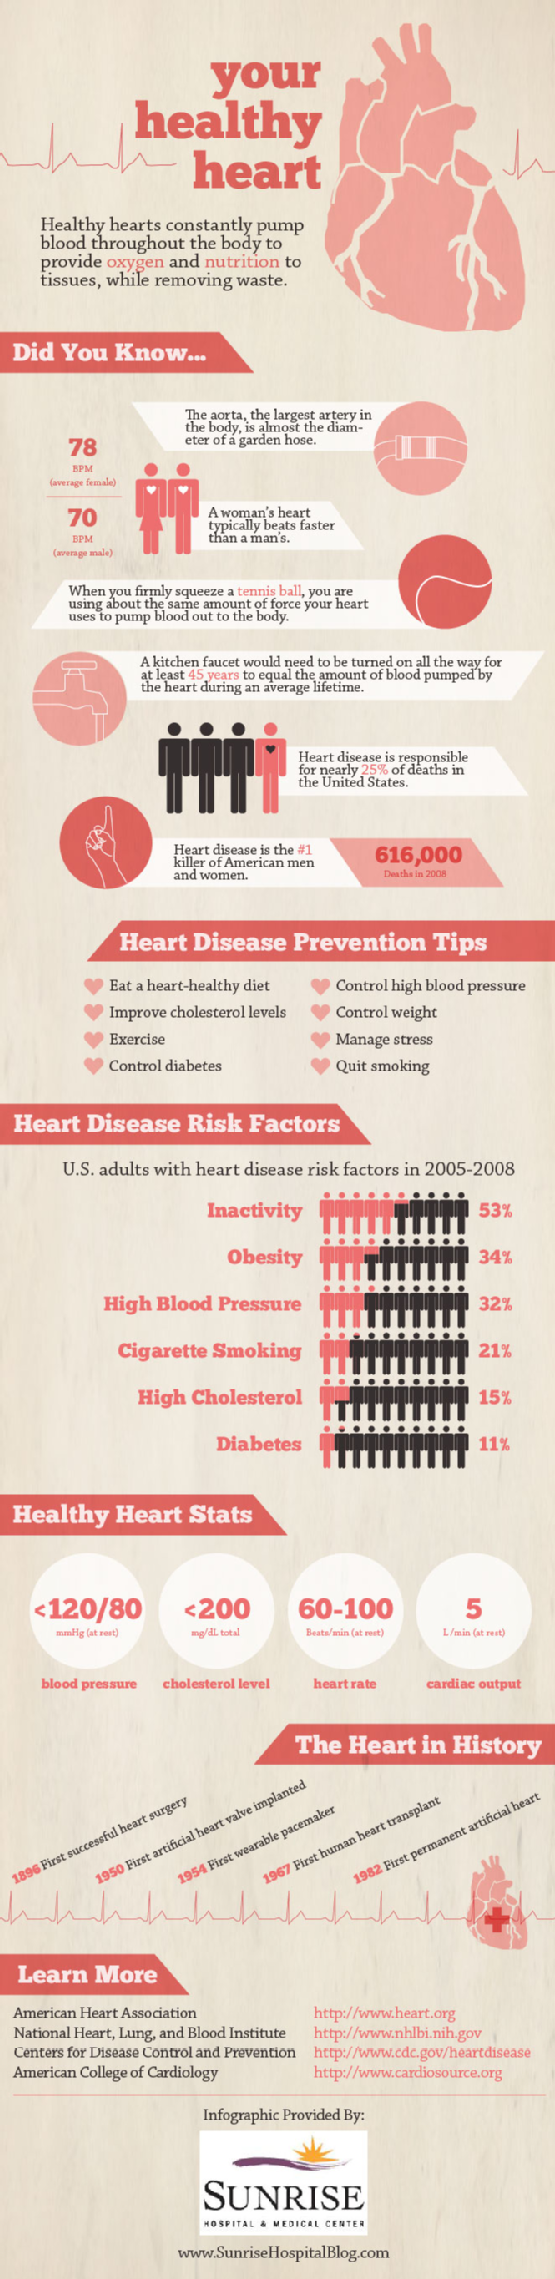 Tips for Heart Health and Heart Disease Prevention